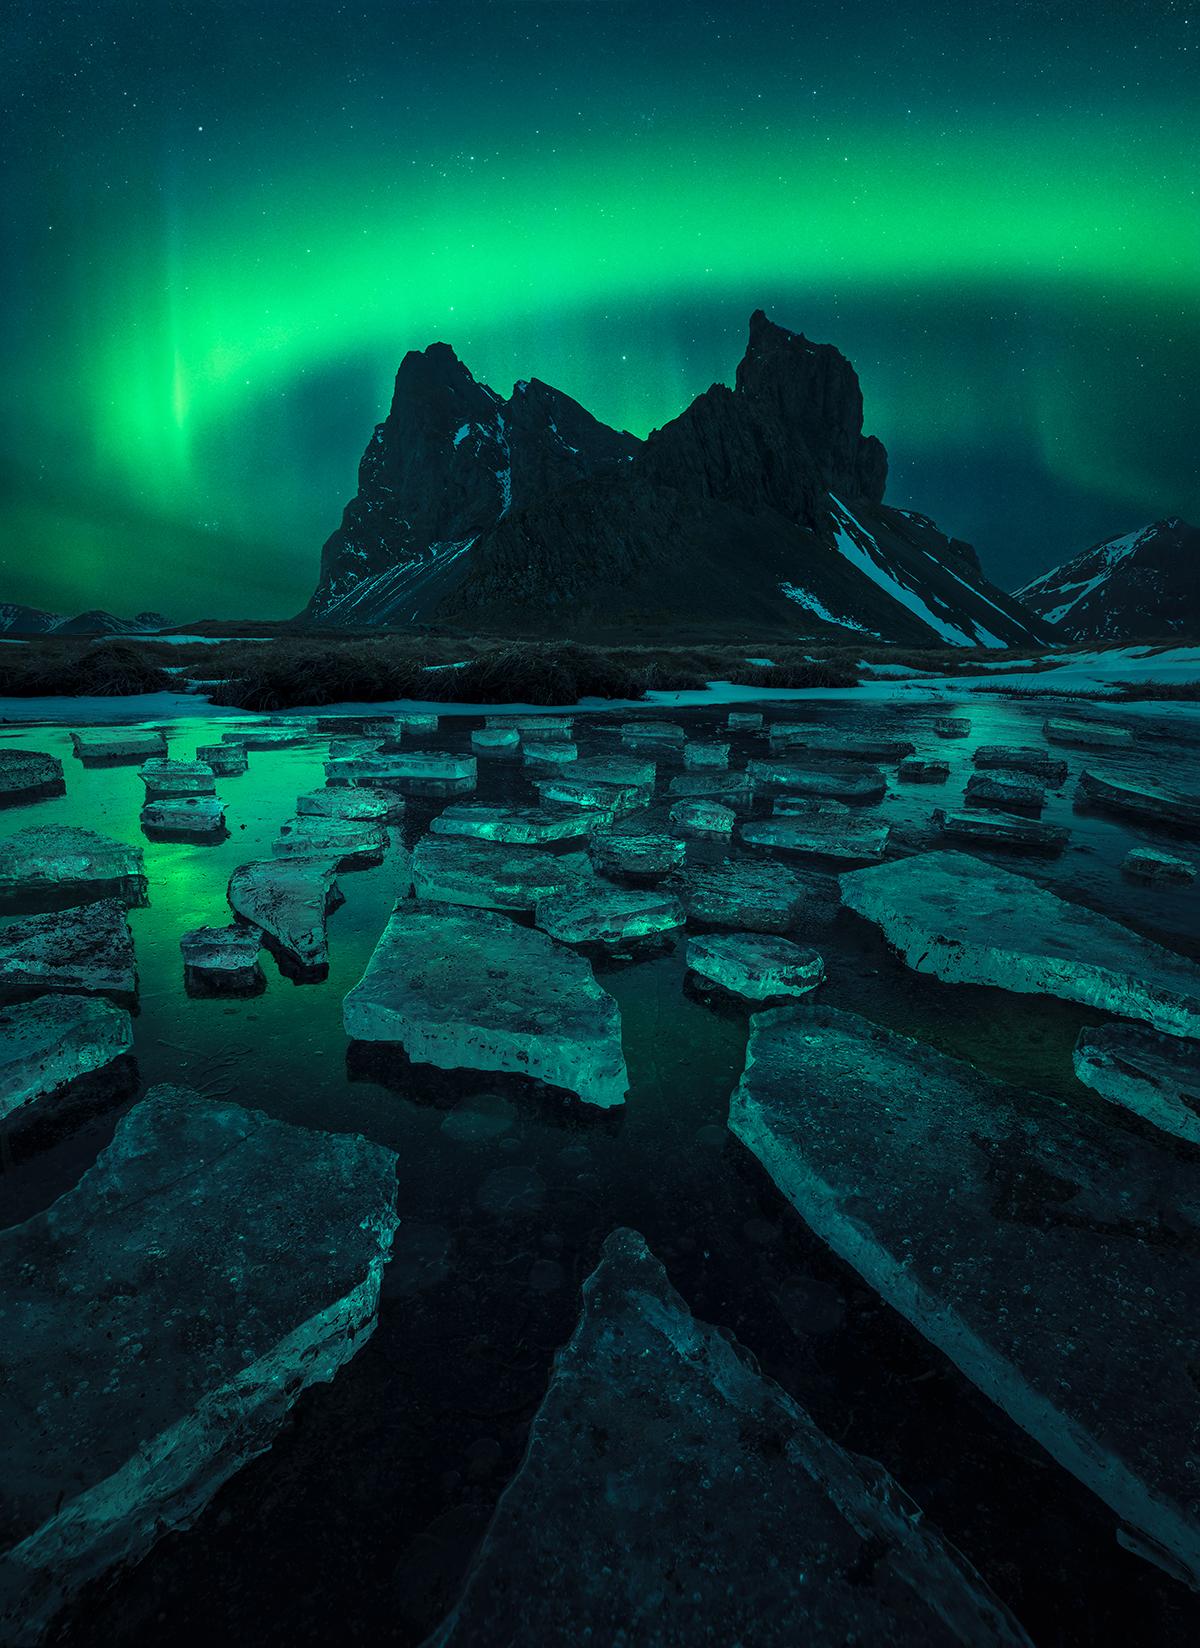 Northern lights over a rocky mountain in Iceland